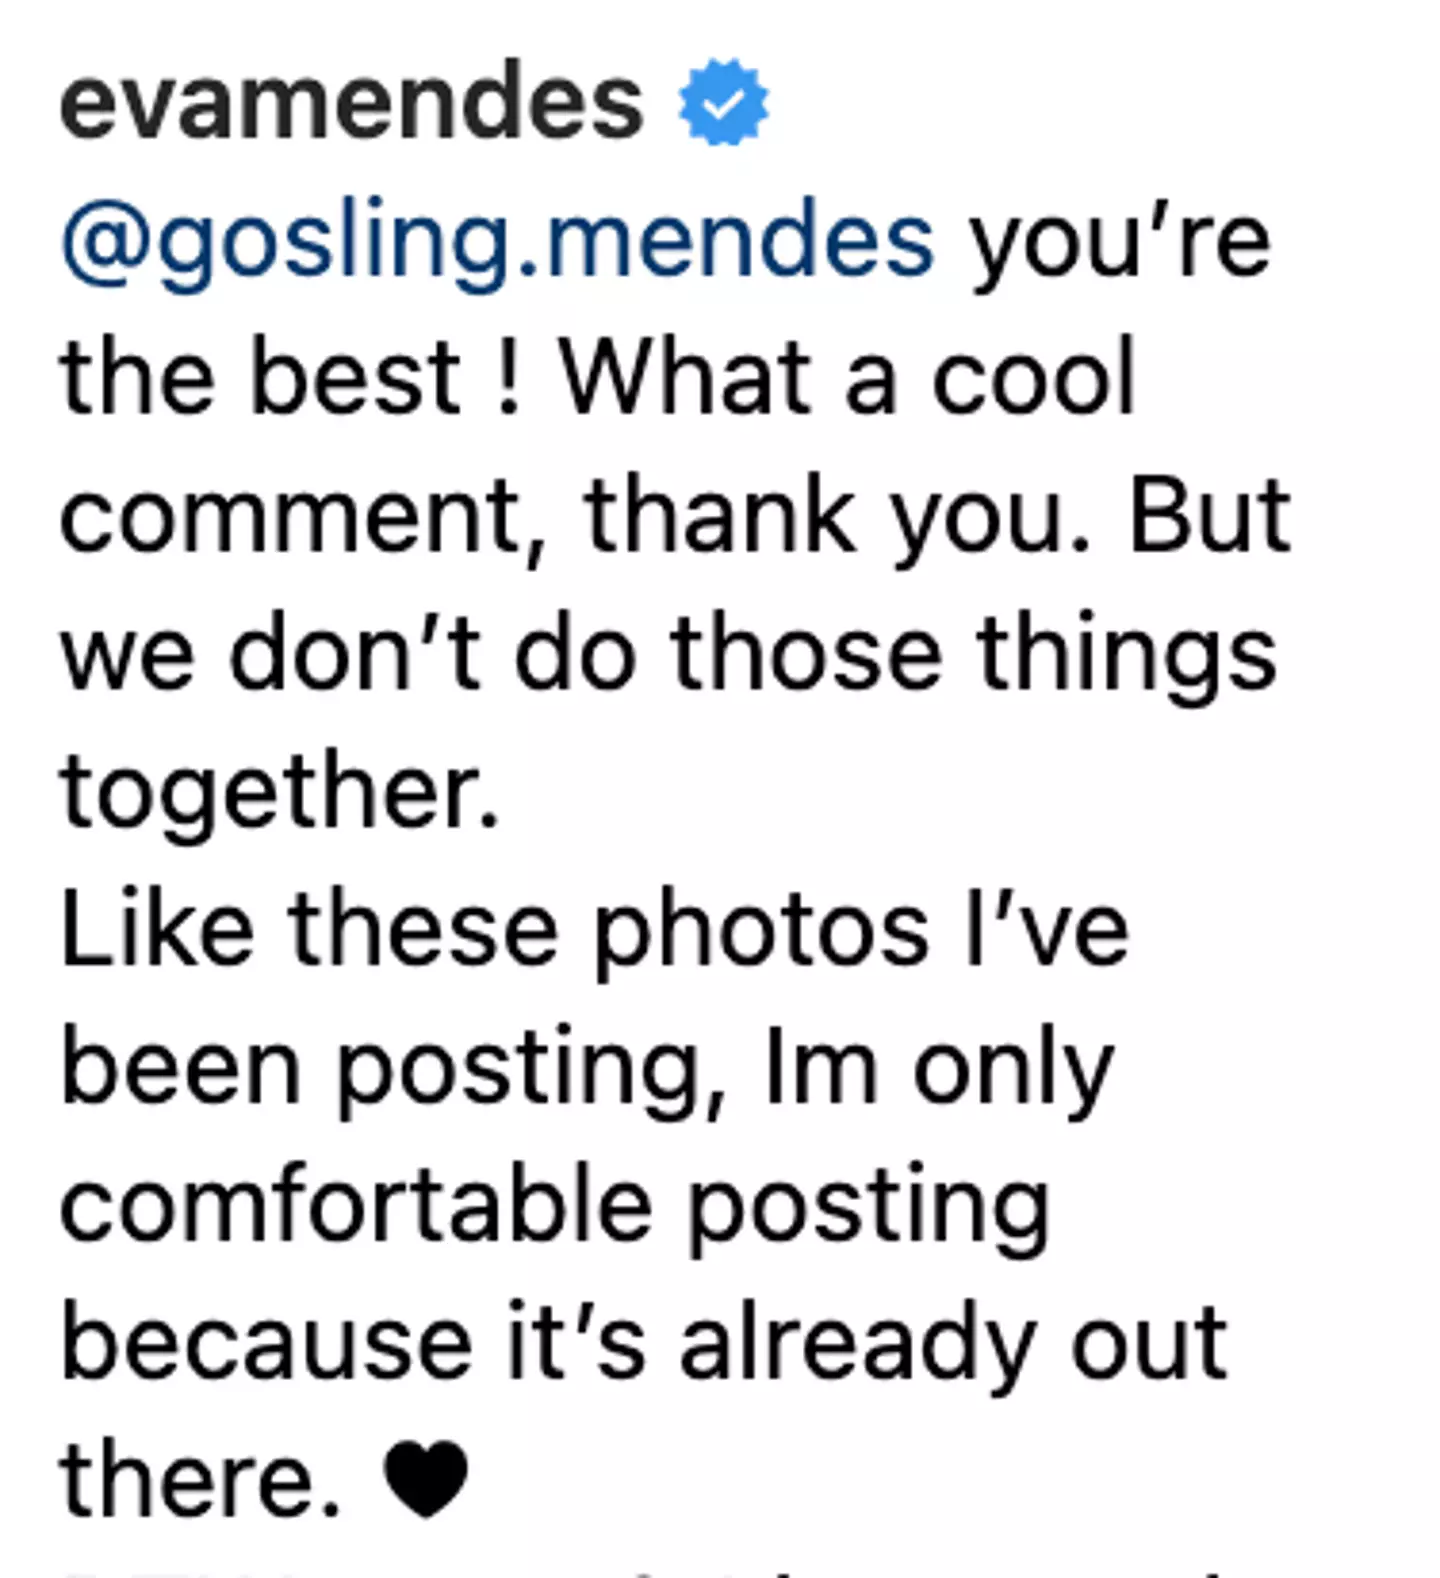 Mendes said she only shares images that are 'already out there'.